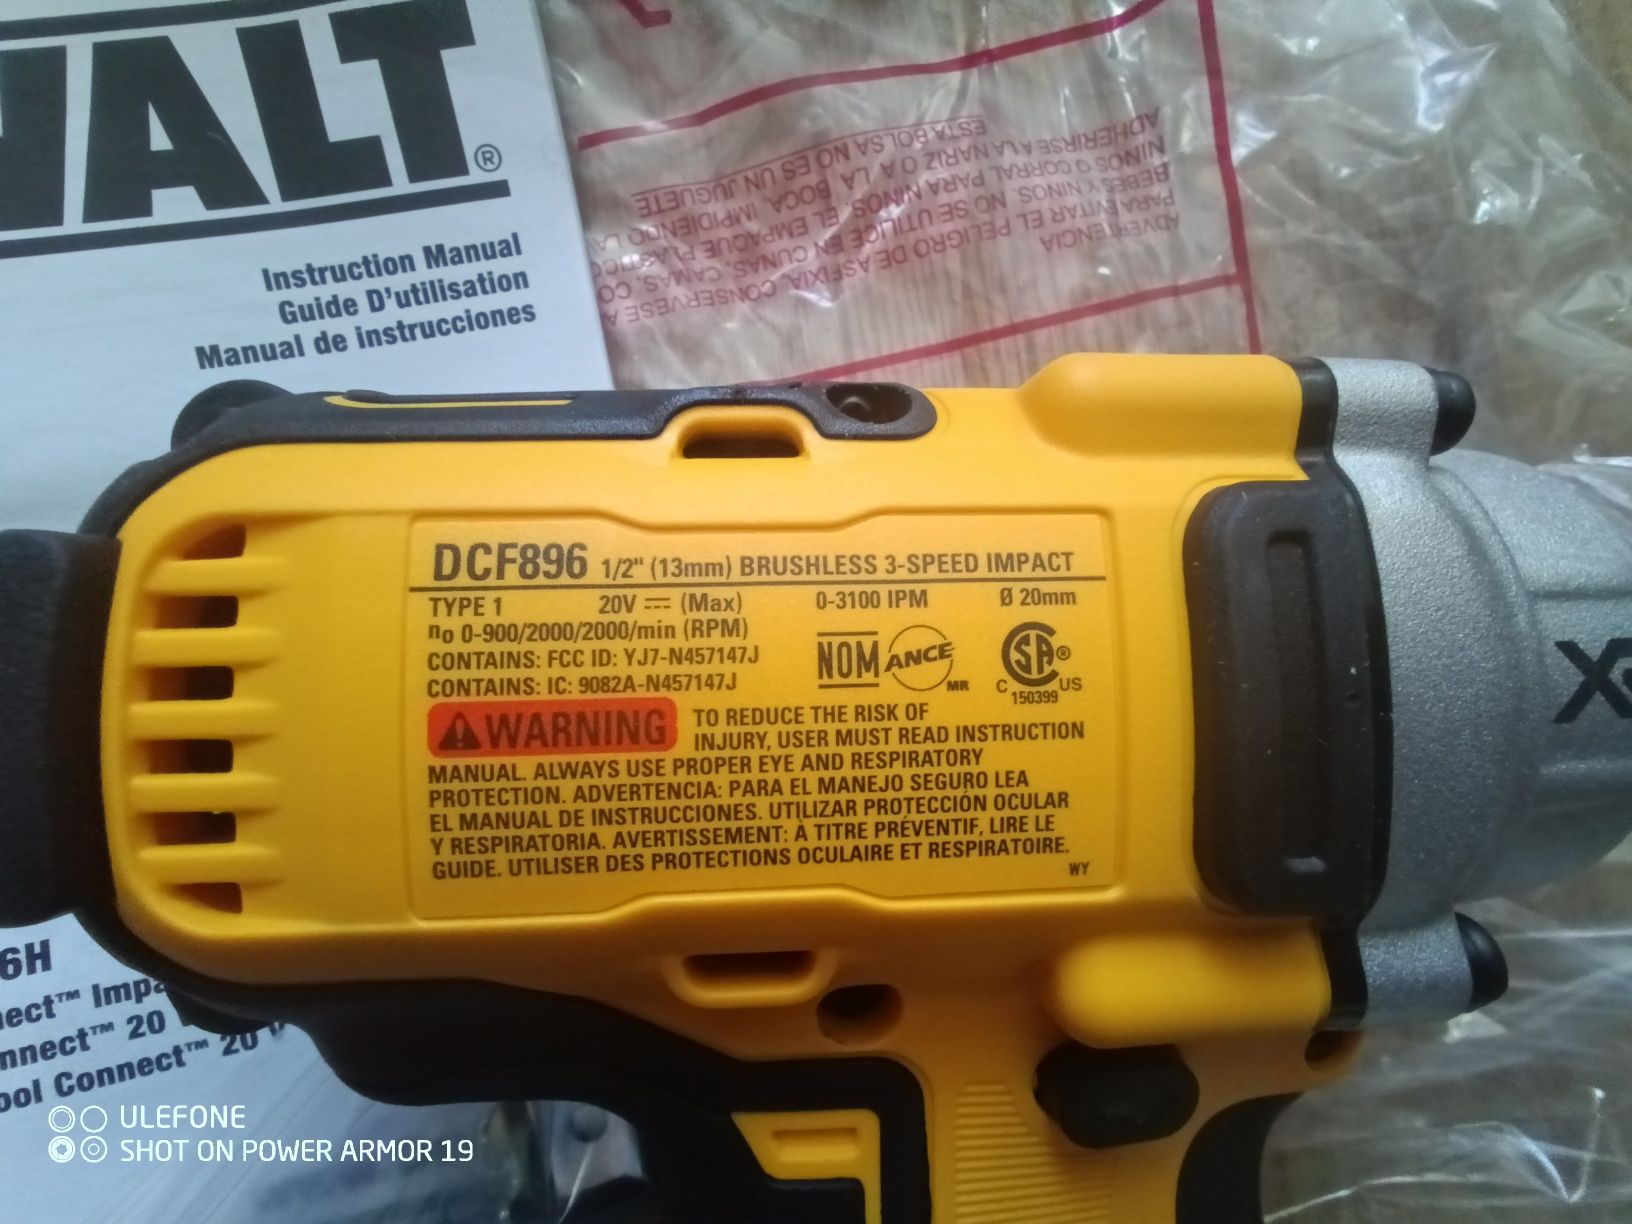 DeWalt DCF896 20V Max Brushless Impact Wrench w/ tool connect